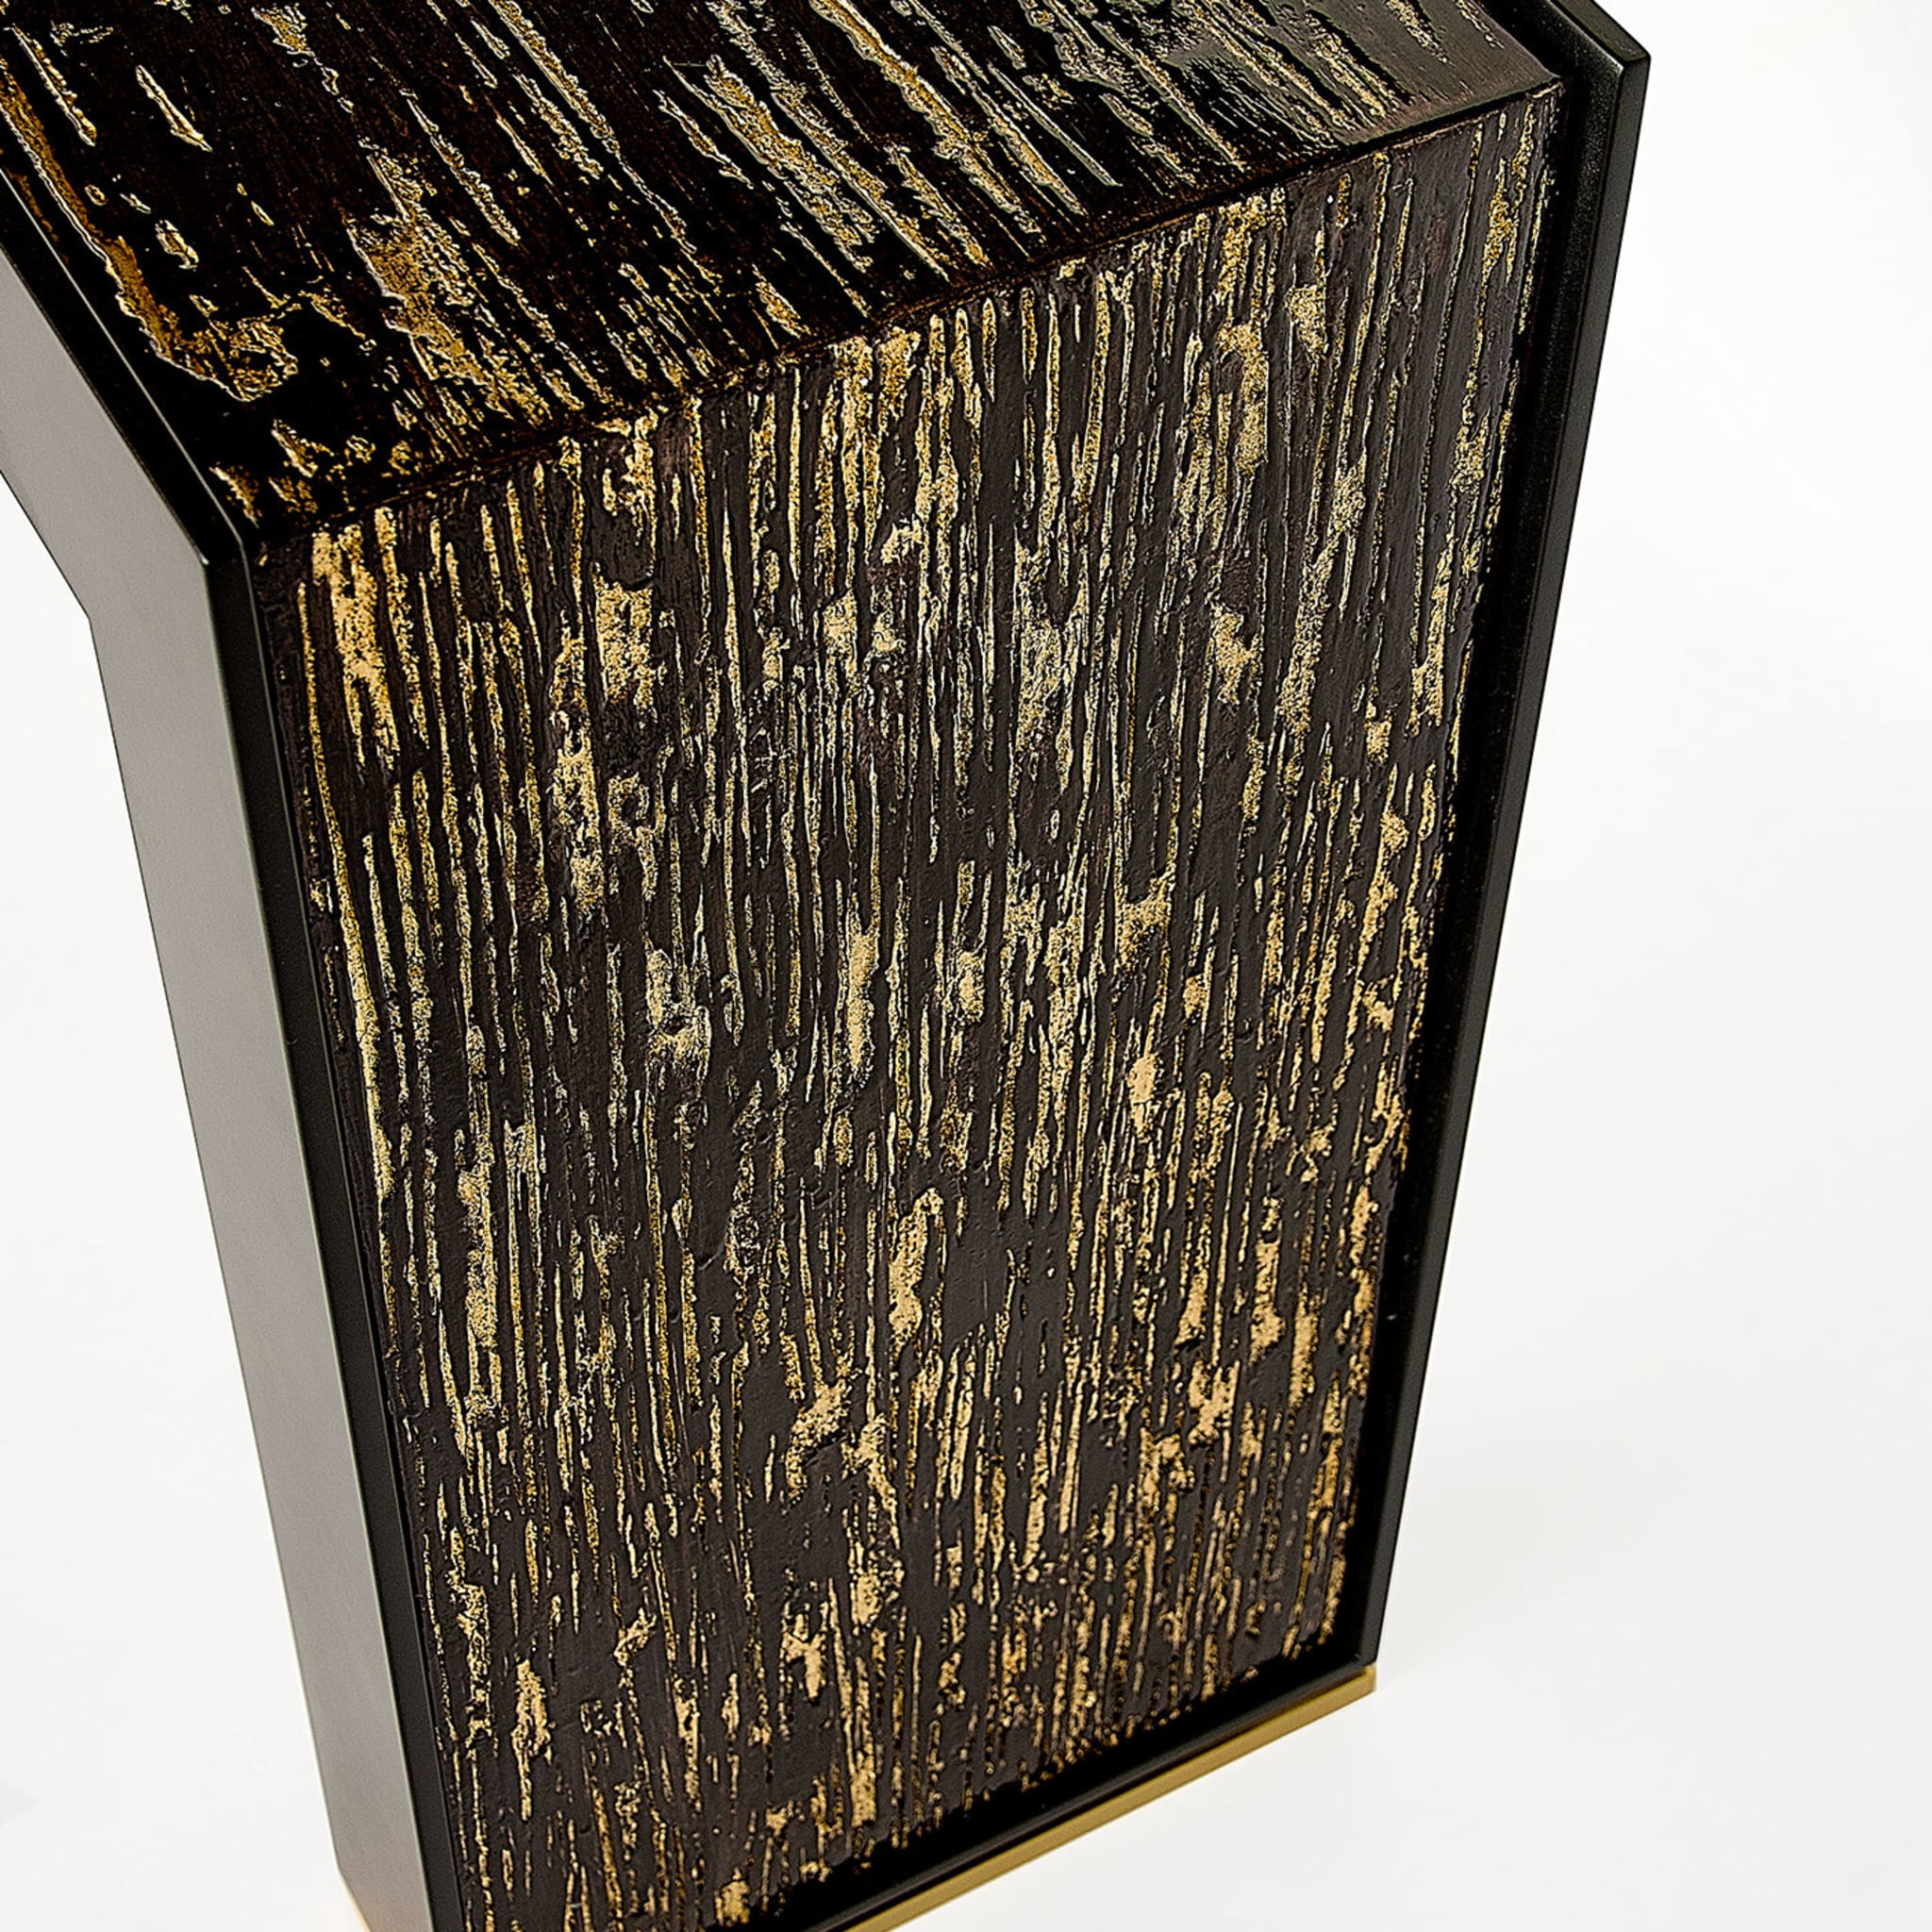 Console table in black and gold wood - Alternative view 3